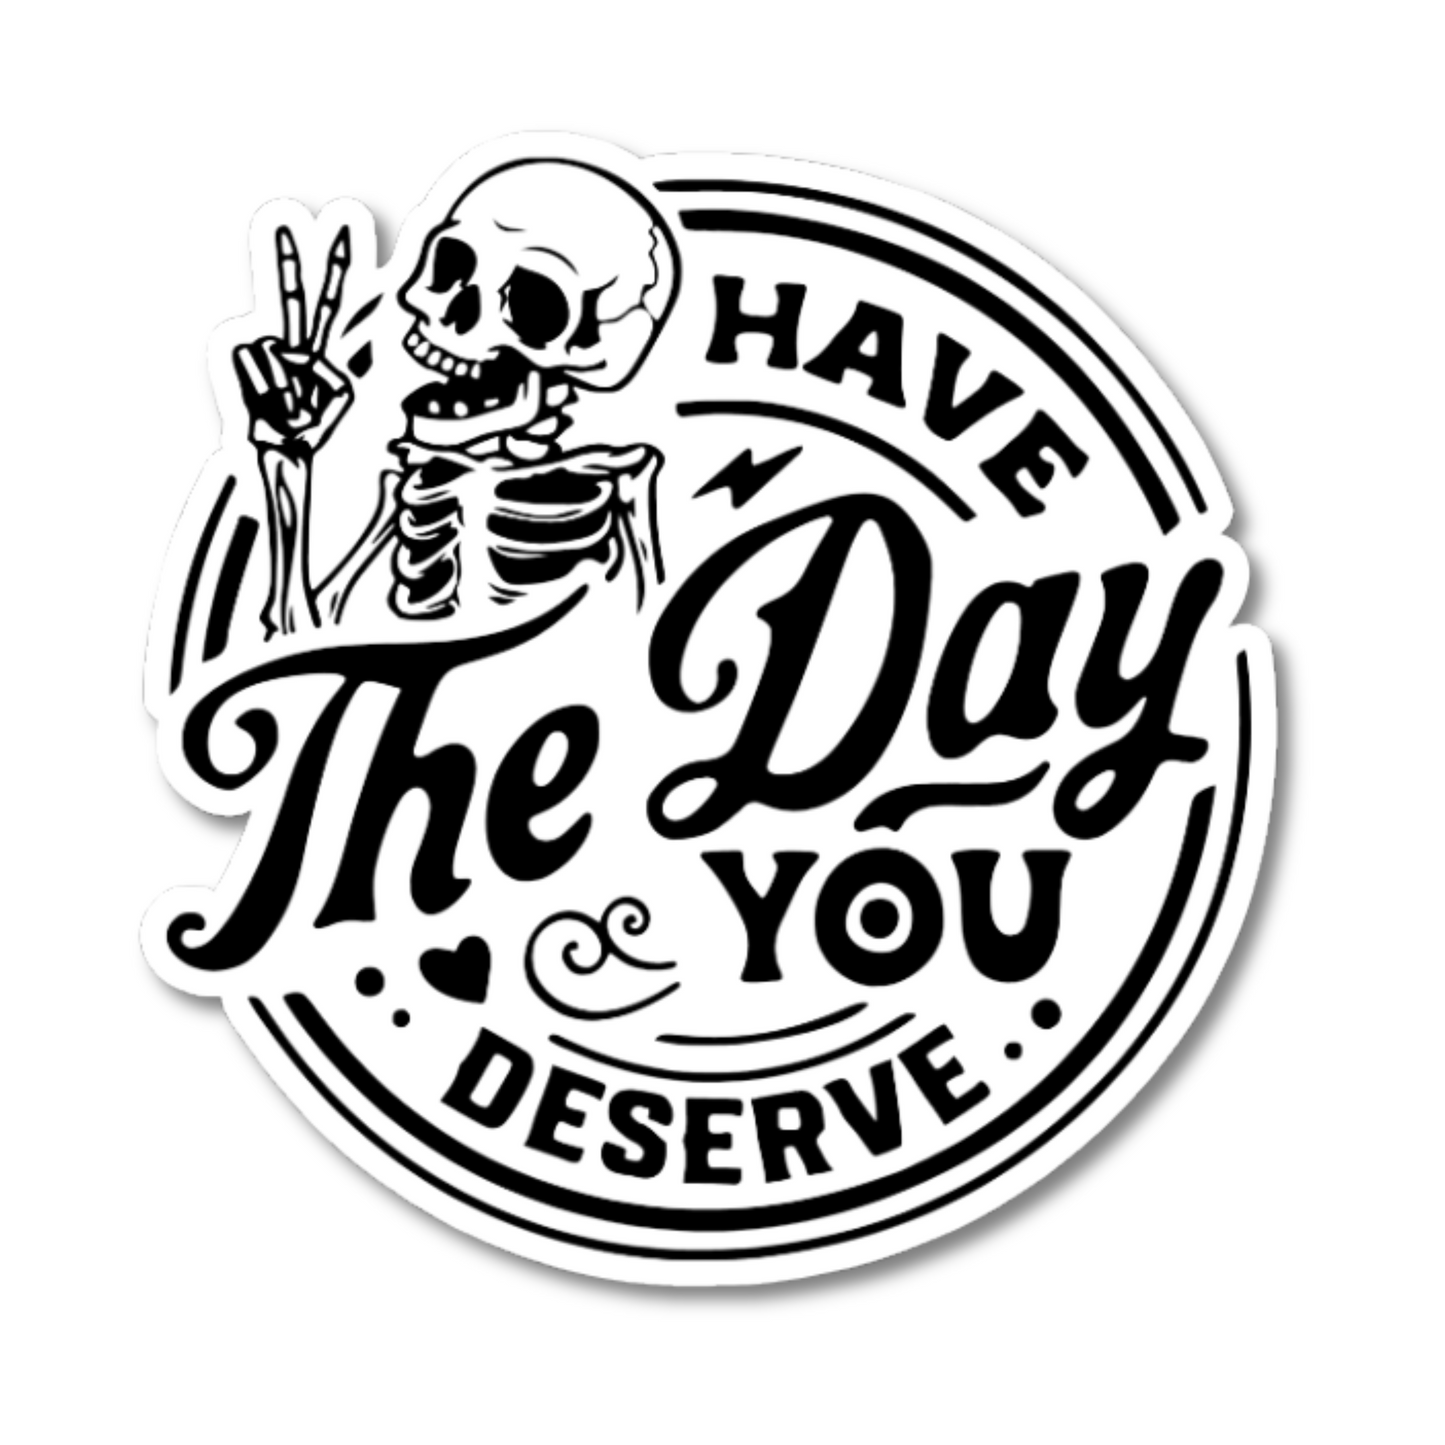 Have The Day You Deserve Sticker - Funny Sticker